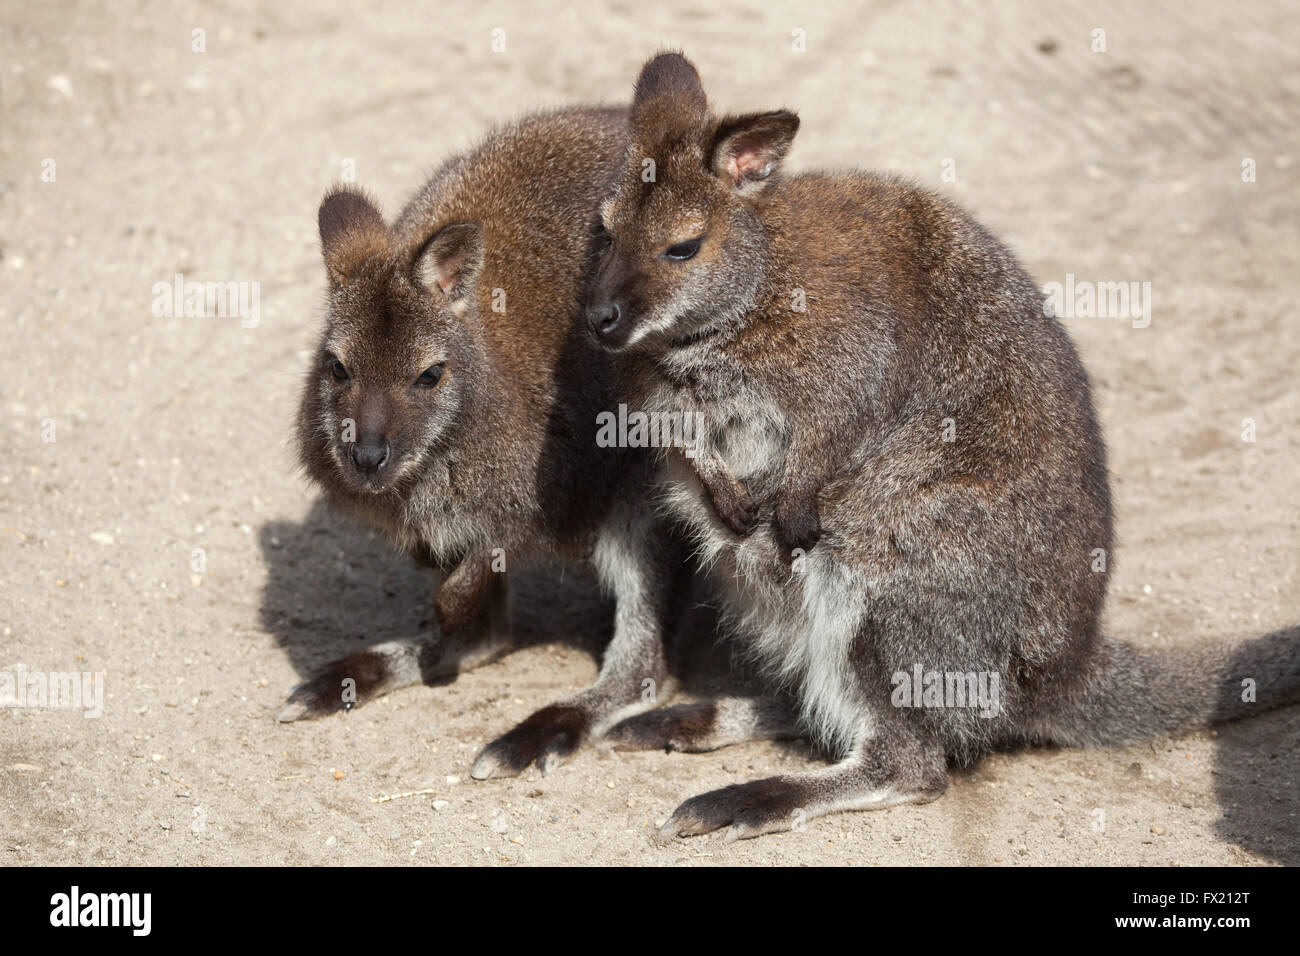 Red-necked wallaby (Macropus rufogriseus), also known as the Bennett's wallaby at Budapest Zoo in Budapest, Hungary. Stock Photo